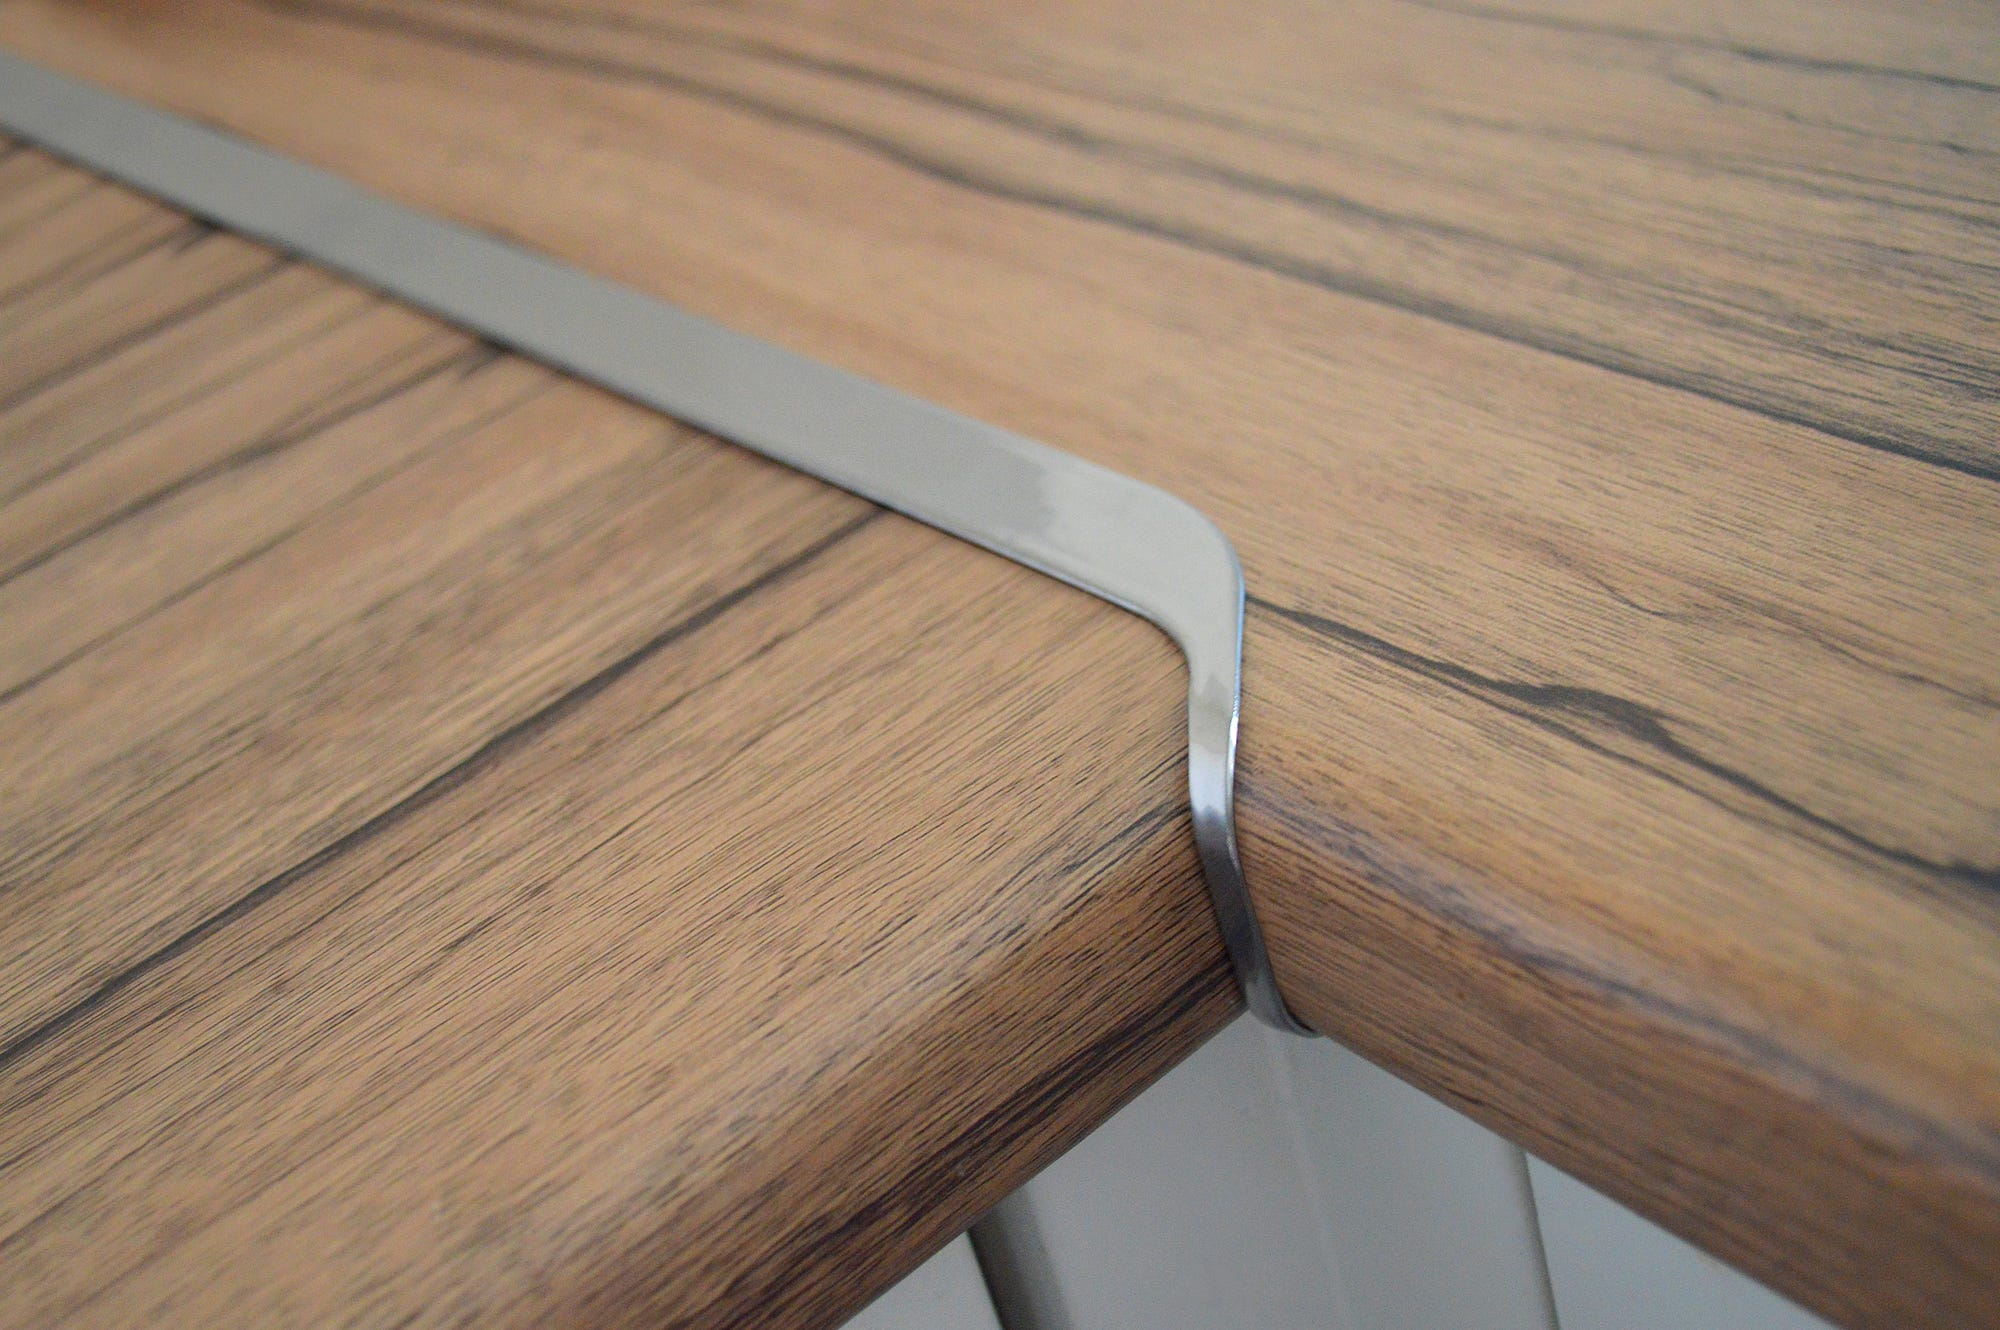 The Mason’s Mitre Worktop Trim, our first product launch 🚀